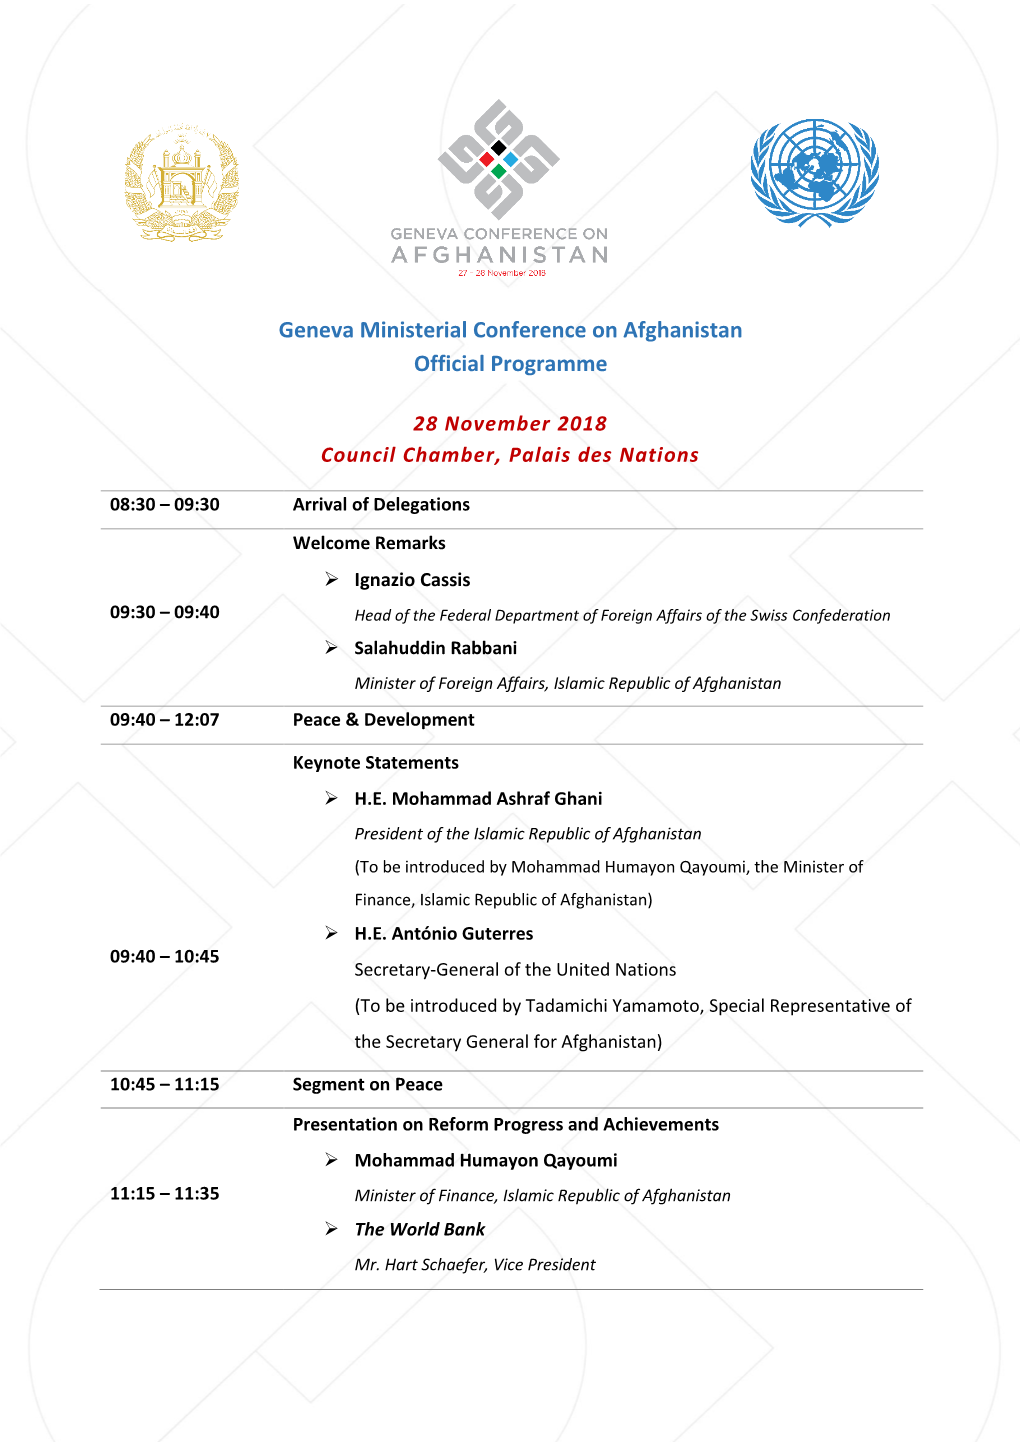 Geneva Ministerial Conference on Afghanistan Official Programme